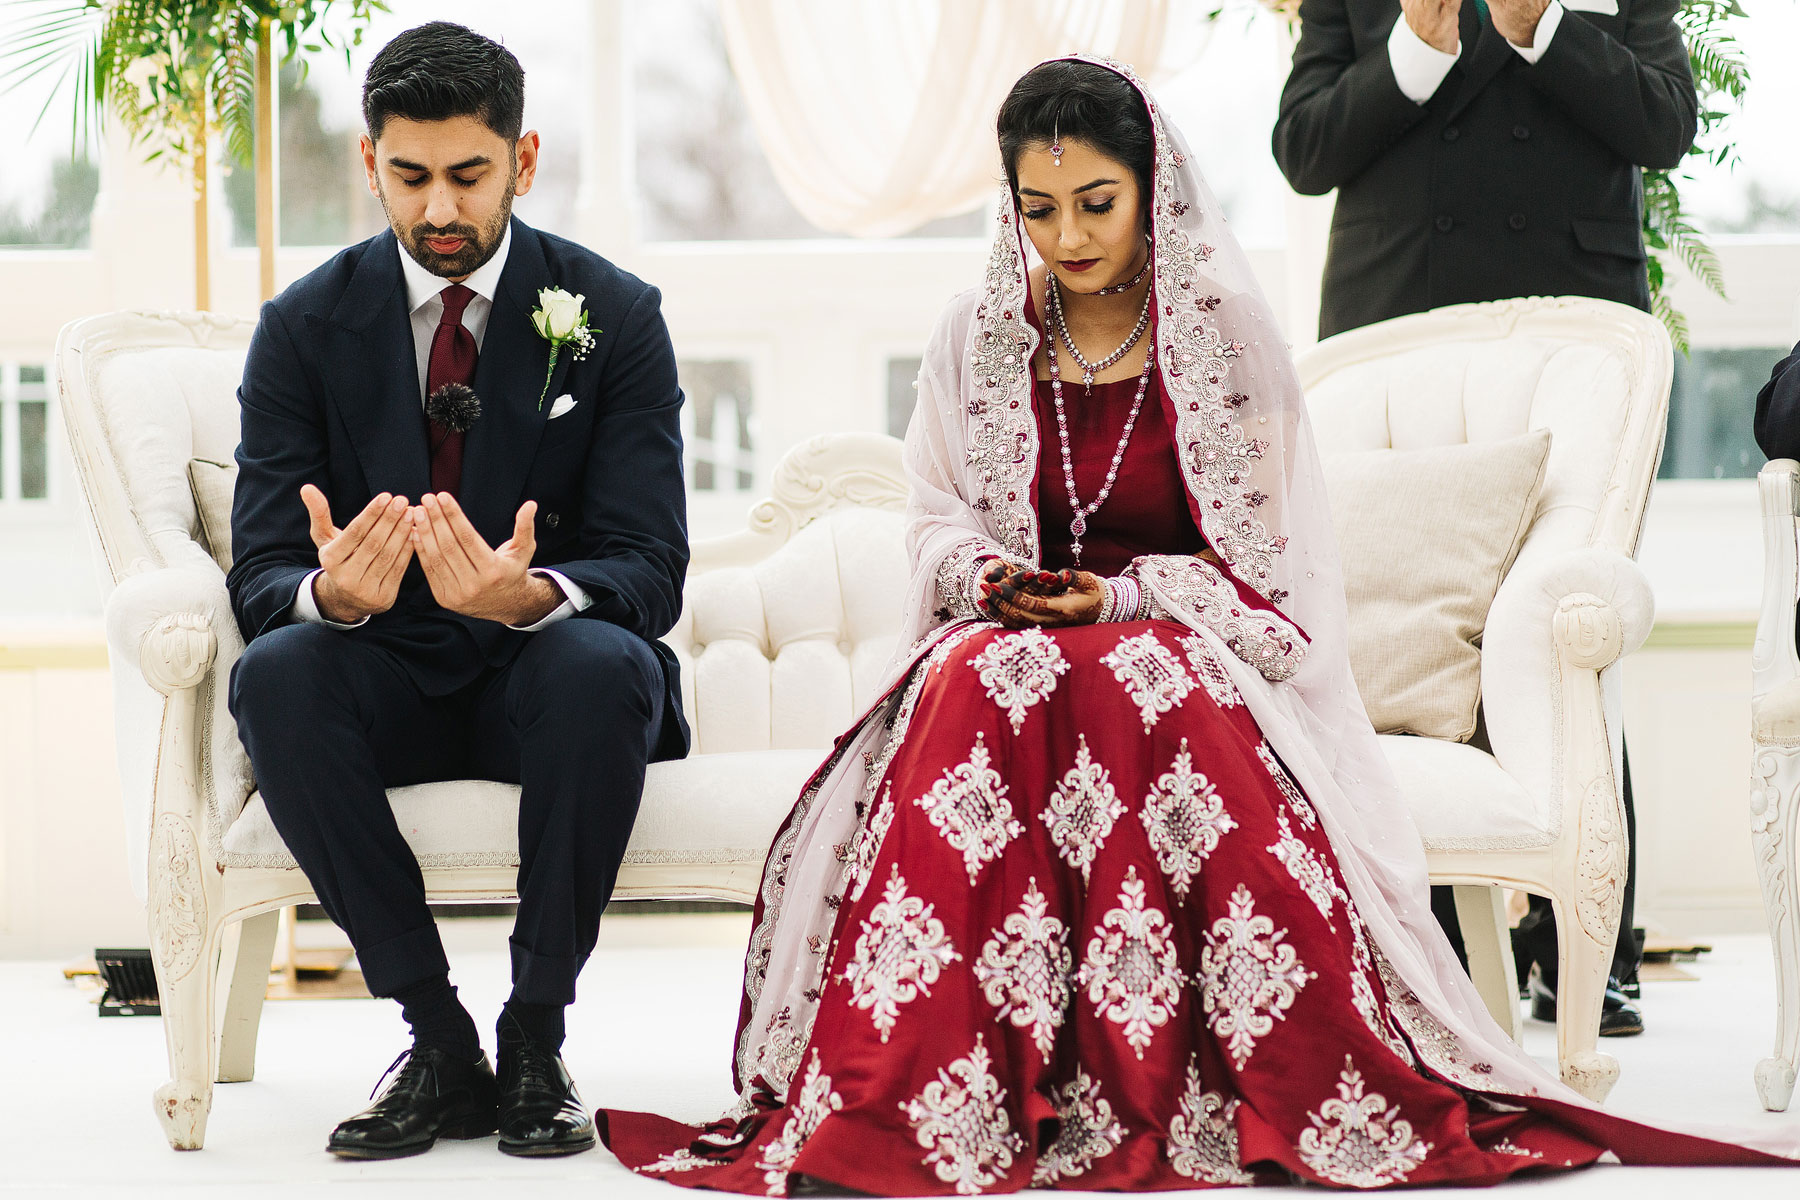 muslim pakistani getting married in a colourful wedding ceremony